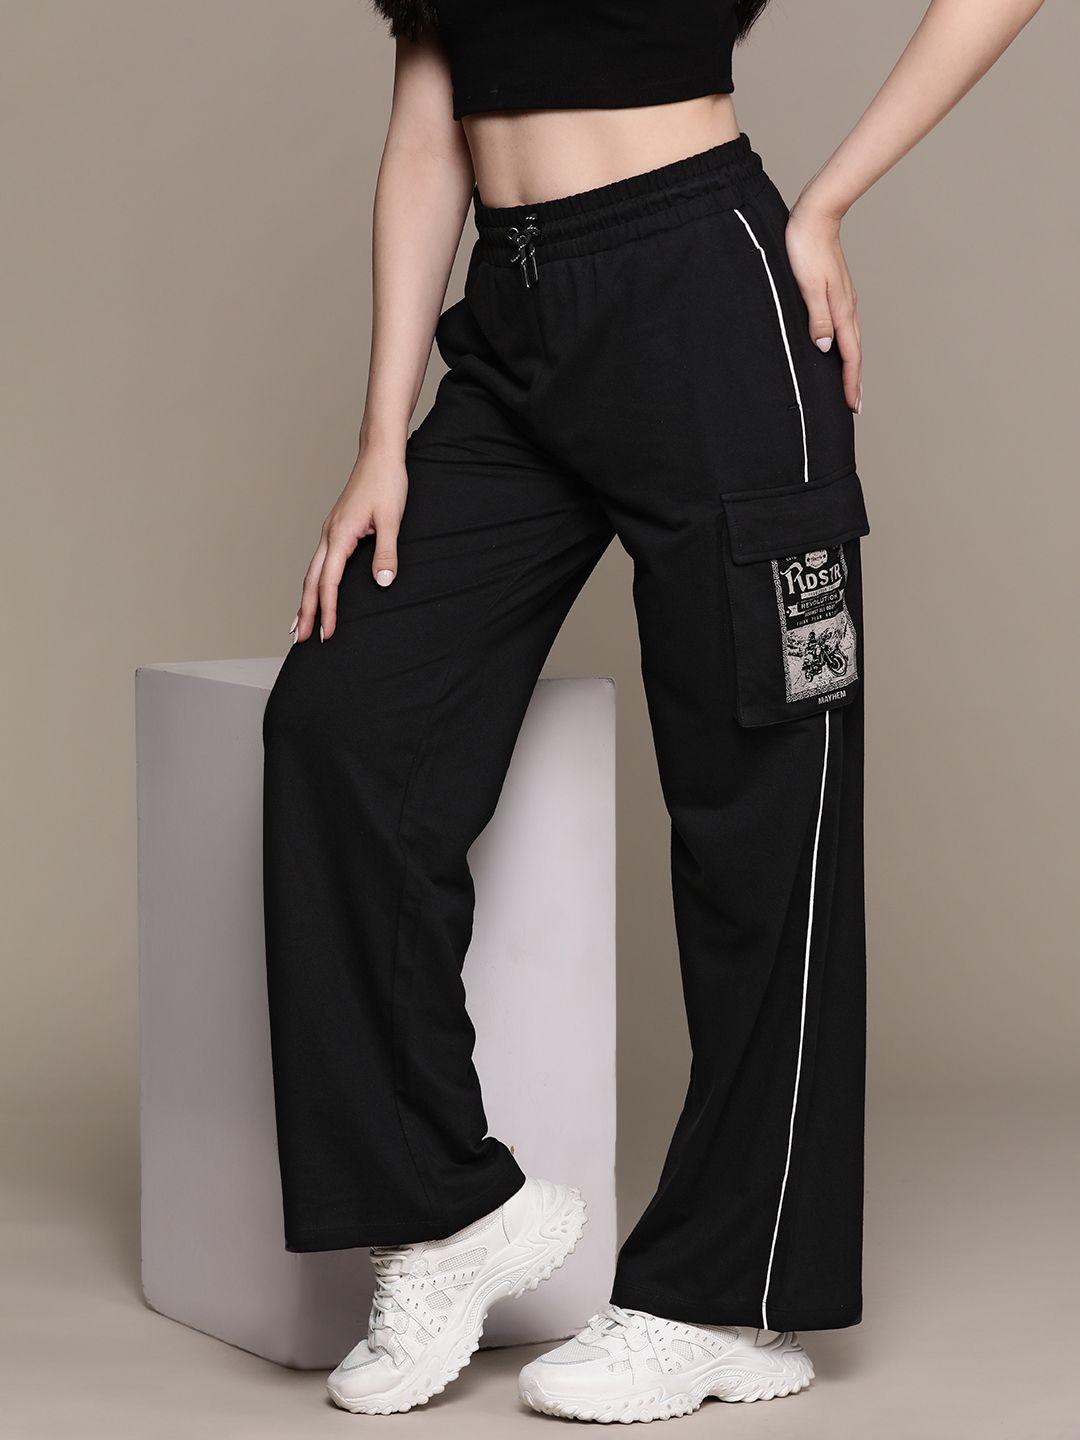 the-roadster-lifestyle-co.-re/lax-women-contrast-tipping-baggy-track-pants